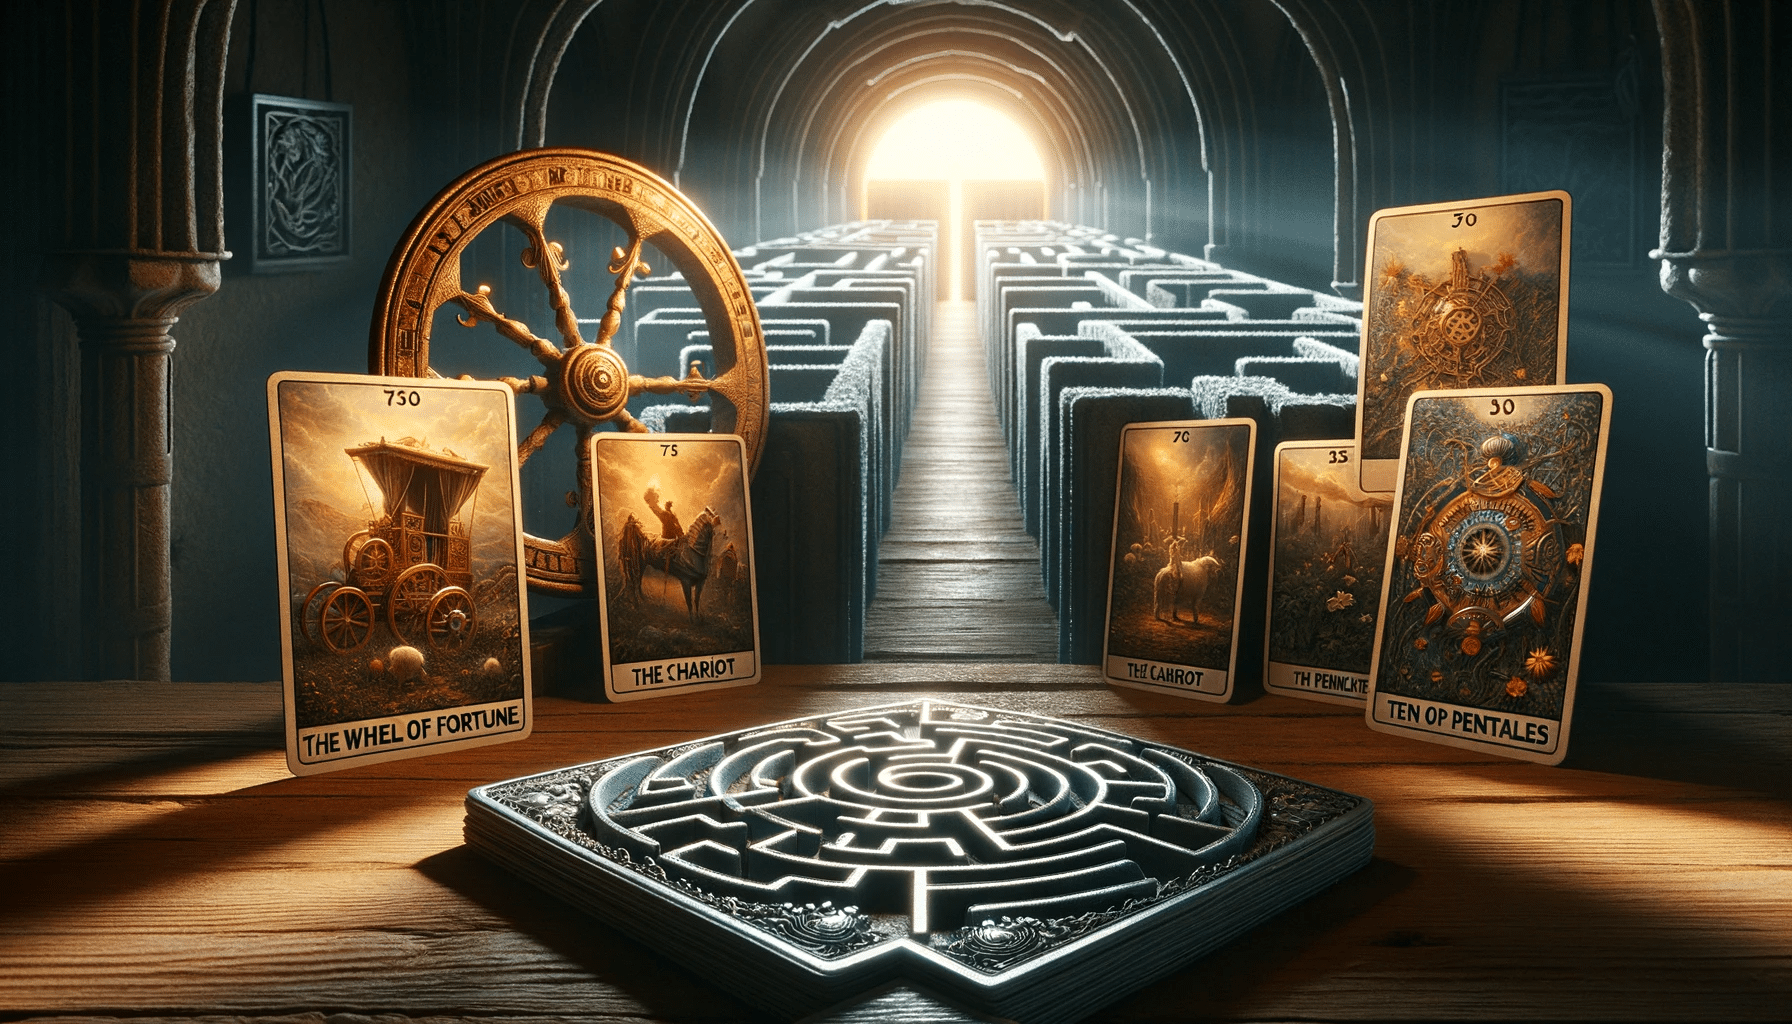 A tarot card interpretation for career showing cards like the Wheel of Fortune, The Chariot, and Ten of Pentacles at a labyrinth's start with lit paths.